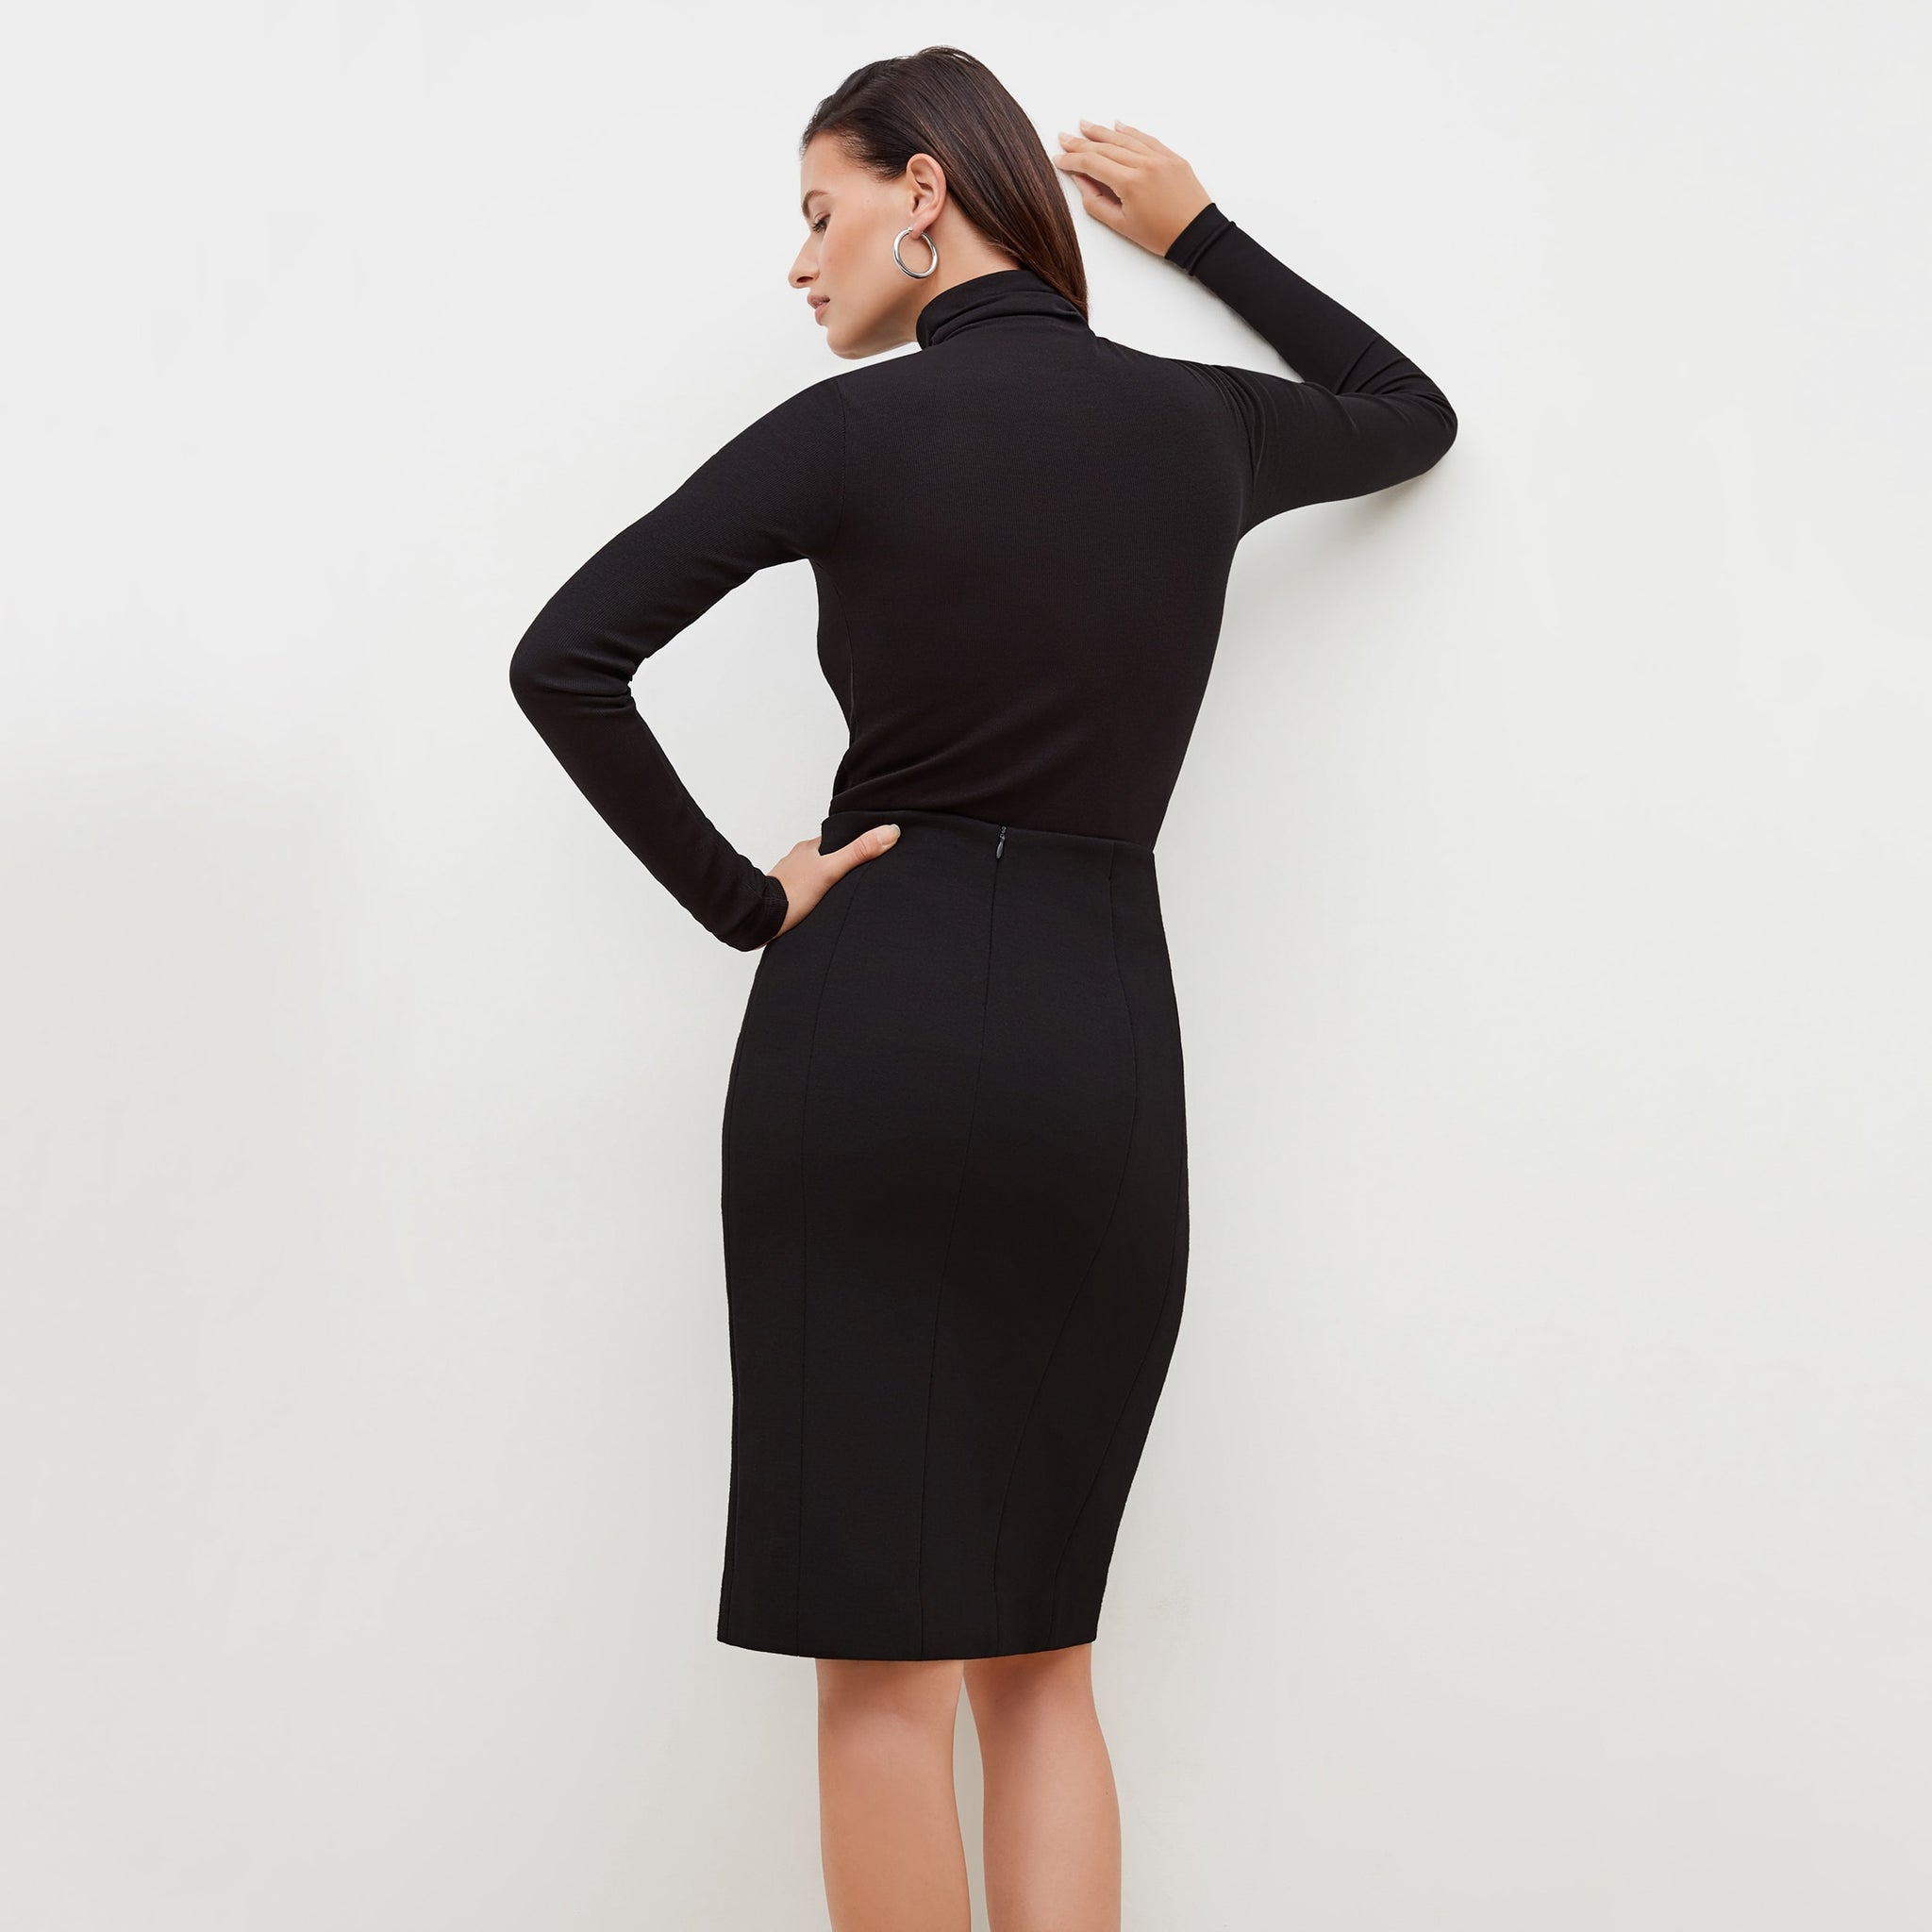 Back image of a woman standing wearing the axam top in black